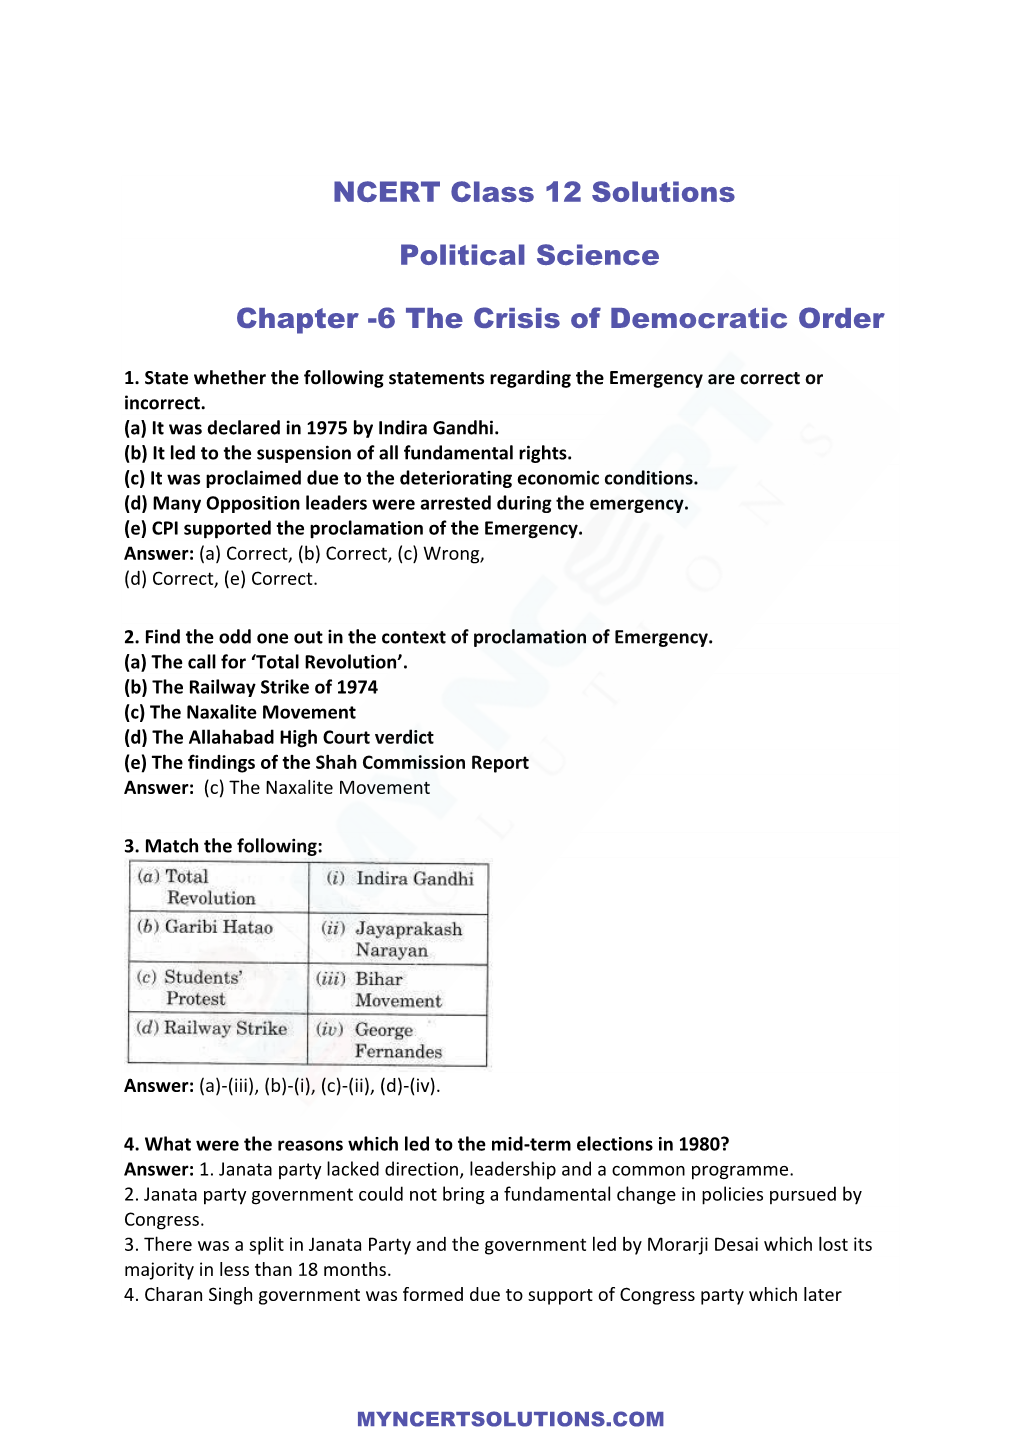 NCERT Class 12 Solutions Political Science Chapter -6 the Crisis Of